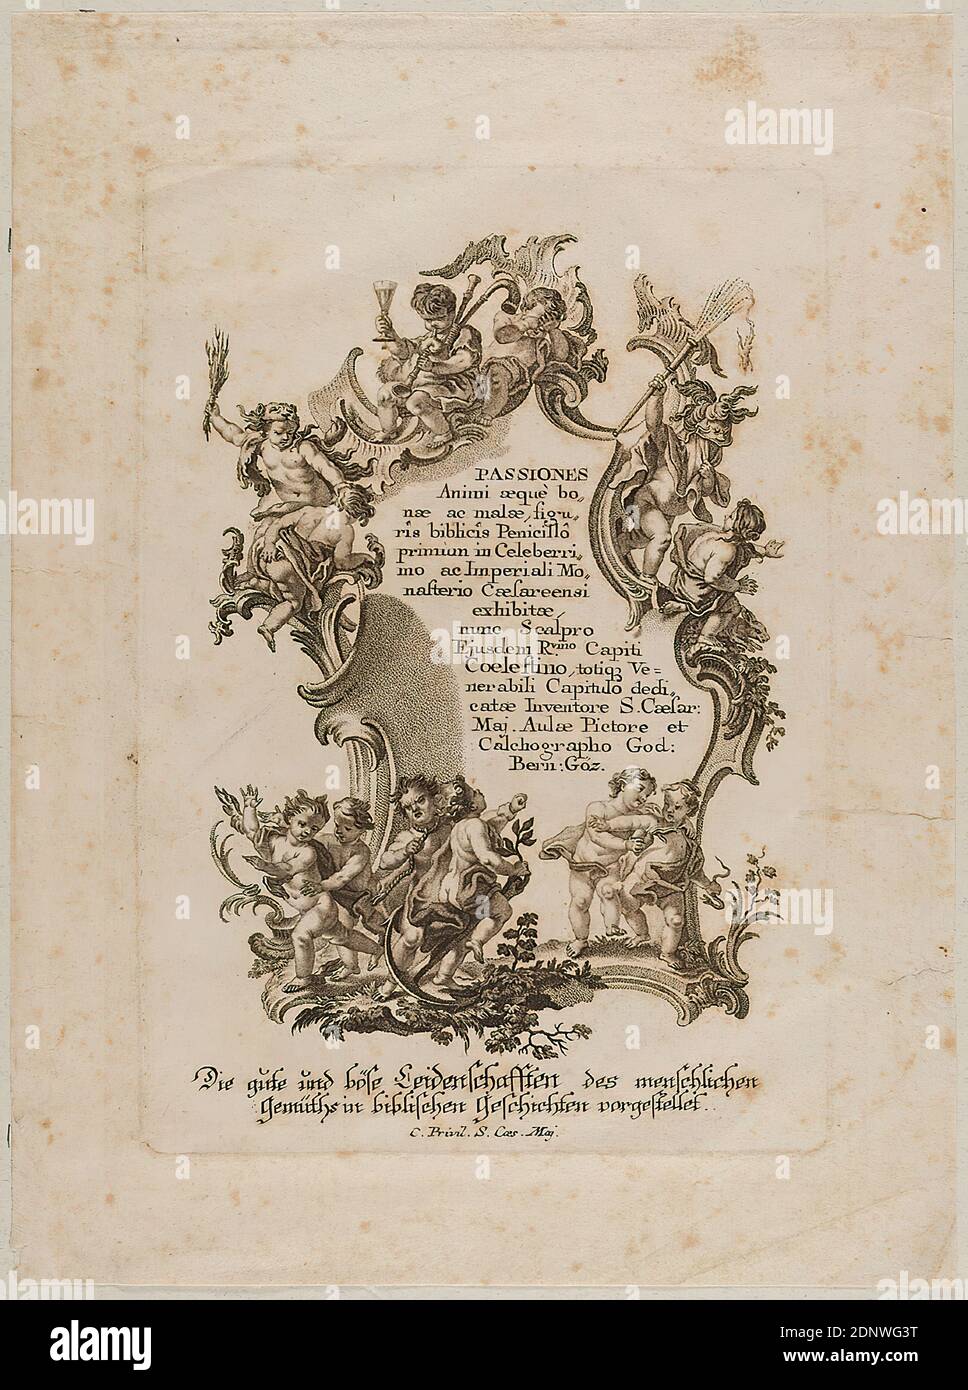 Gottfried Bernhard Göz, Rocaille cartouche with putti and title, dotted manner, leaf size: height: 23.2 cm; width: 17.2 cm, inscribed on the plate: Maj. Aulae Pictore et Calchographo God: Bern: Göz, The good and bad sufferers of the human mind presented in biblical stories, C. Private. S. Caes. Maj, prints, virtues and vices, Rocaille, title page of the series Passiones Animi aequae bonae ac malae, figuris biblicis Penicillo The good and bad passions of the human mind presented in biblical stories Stock Photo